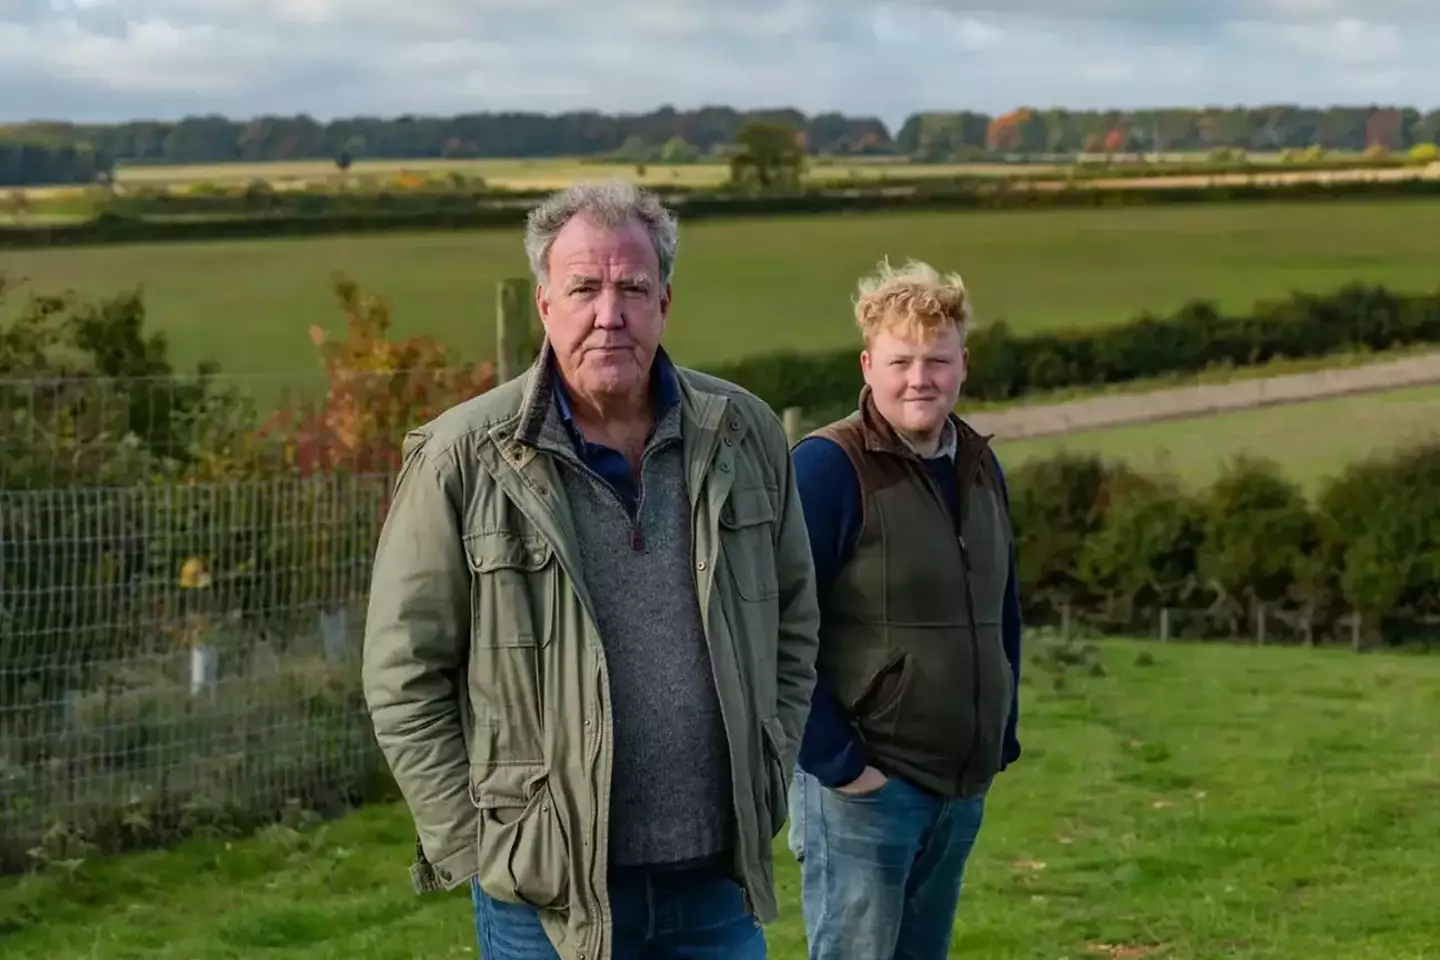 The hugely popular series follows Jeremy Clarkson's farming endeavours.